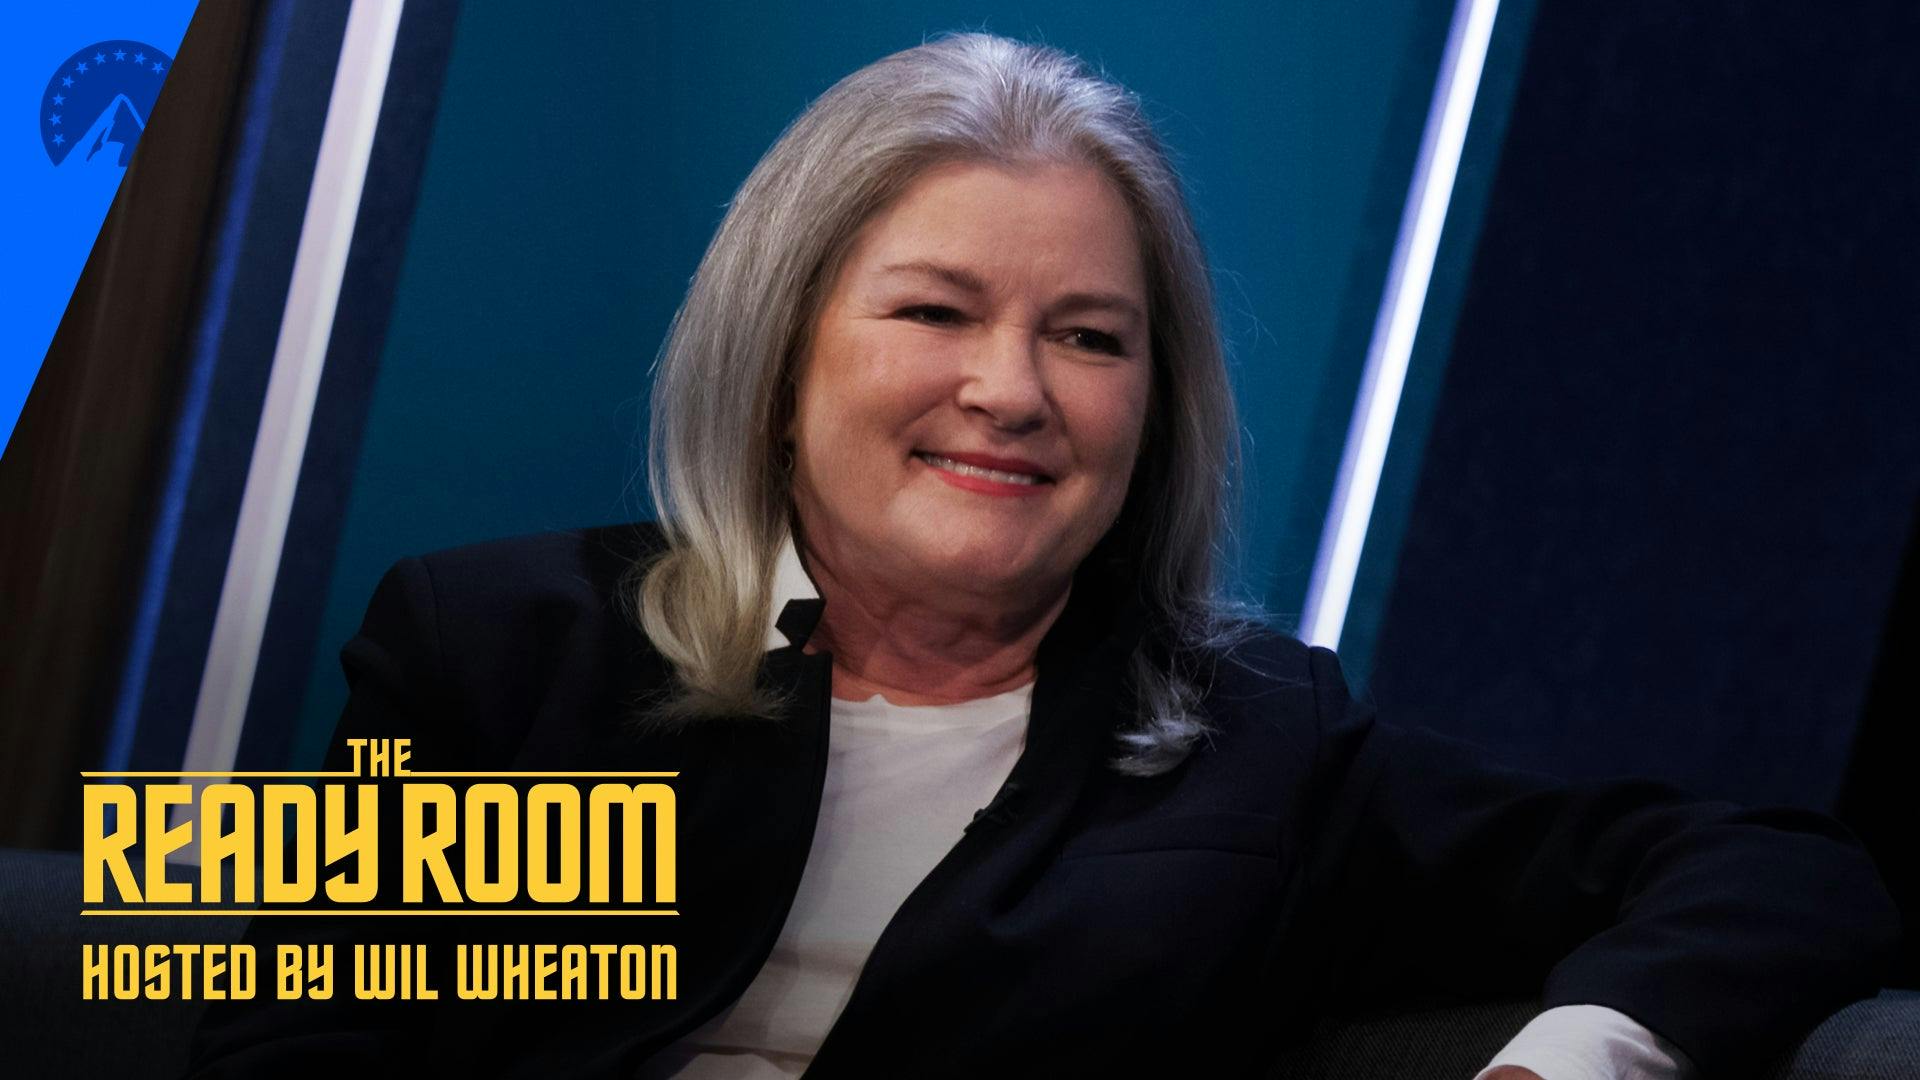 Kate Mulgrew joins The Ready Room